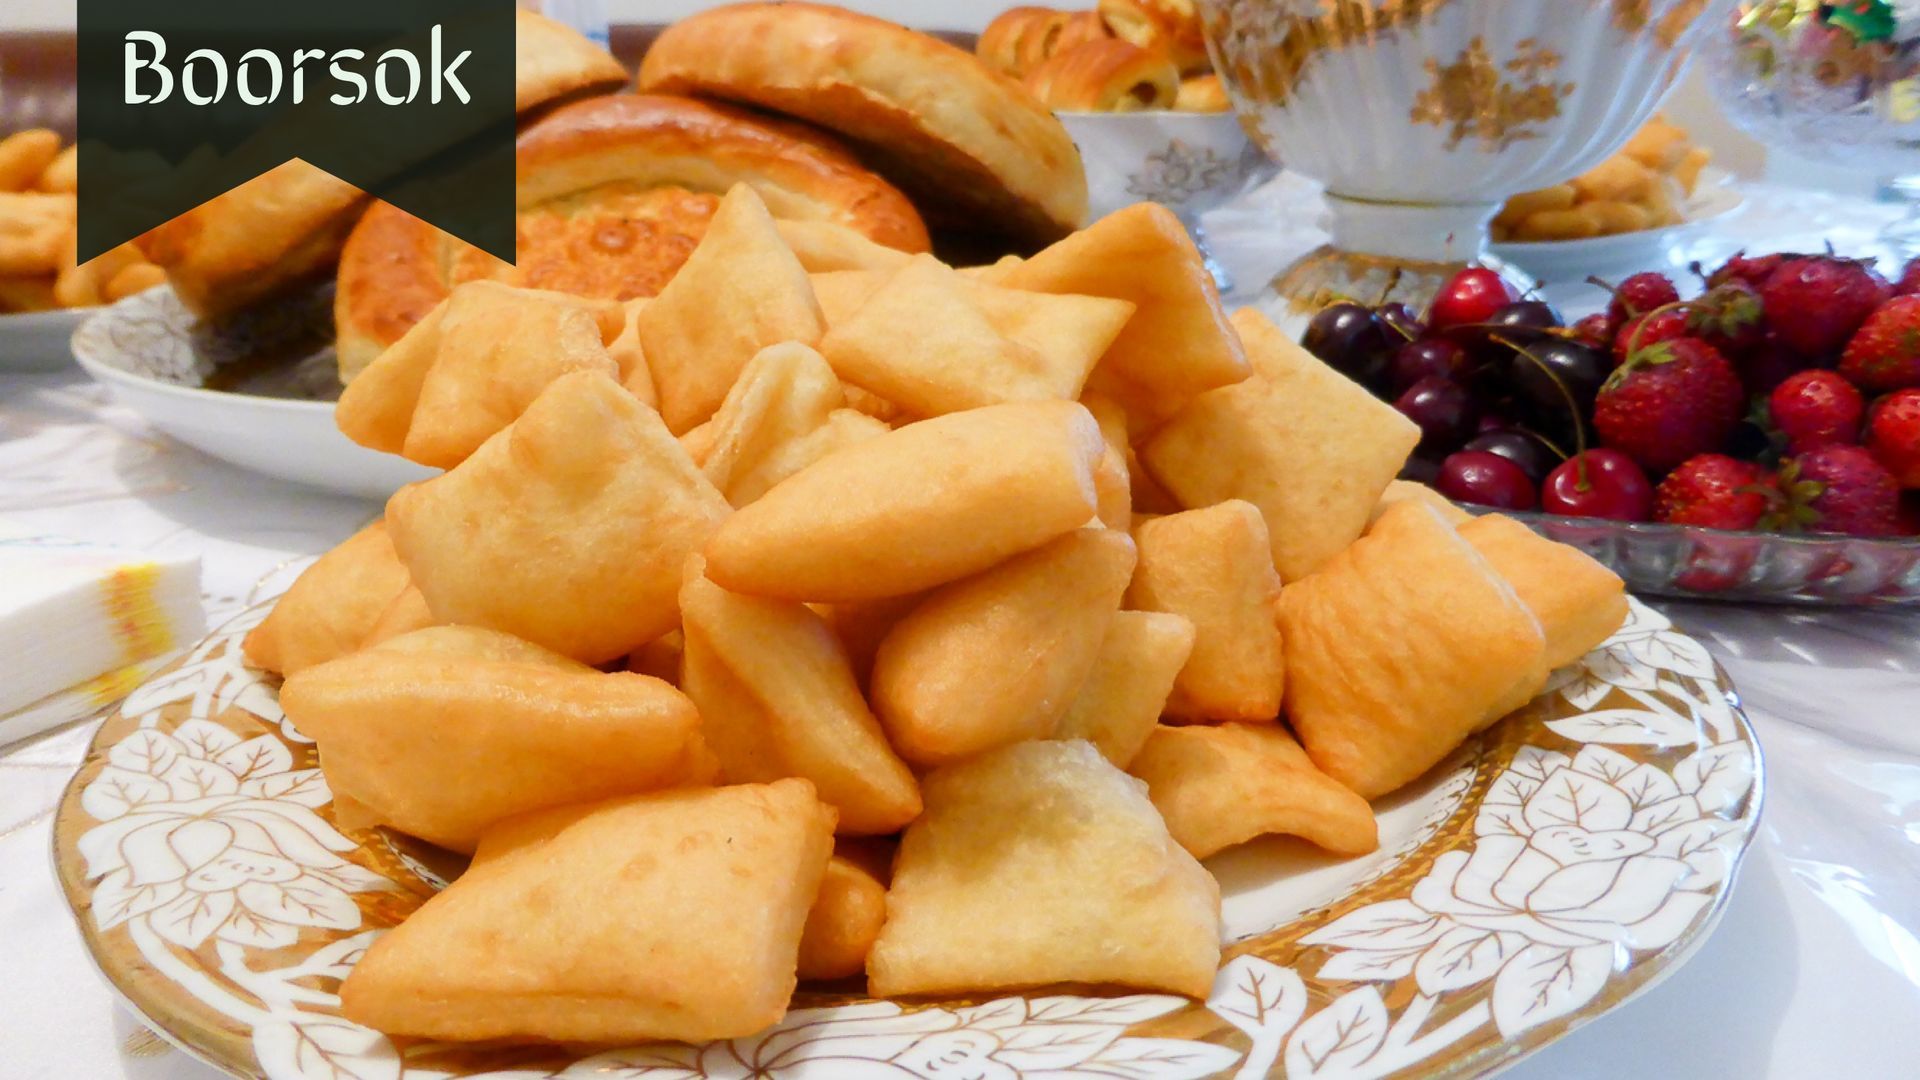 Fried Bread pieces in Central Asia